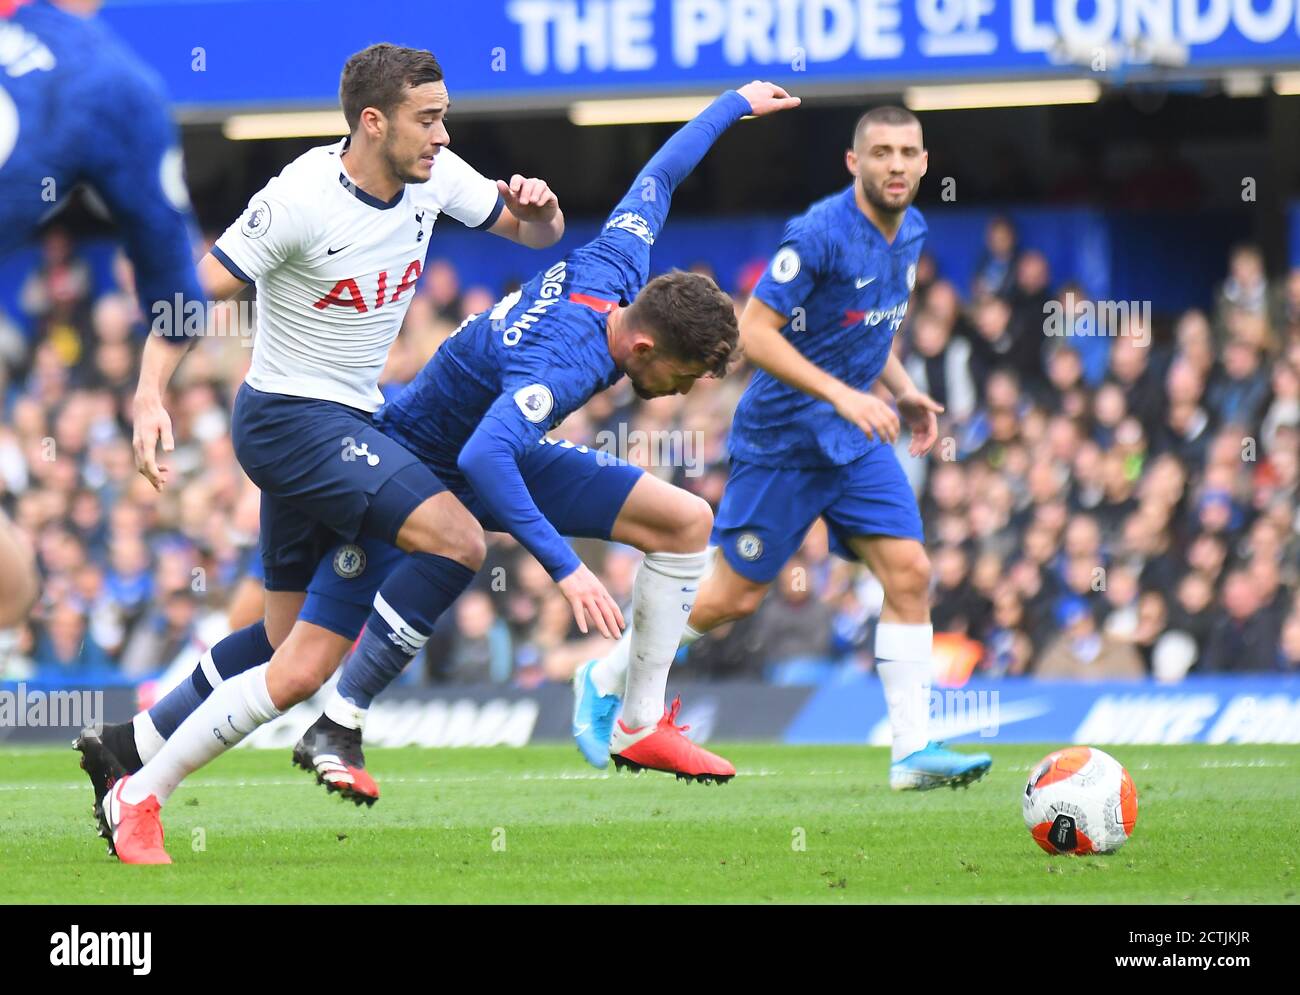 LONDON, ENGLAND - FEBRUARY 22, 2020: Harry Winks of Tottenham pictured during the 2019/20 Premier League game between Chelsea FC and Tottenham Hotspur FC at Stamford Bridge. Stock Photo